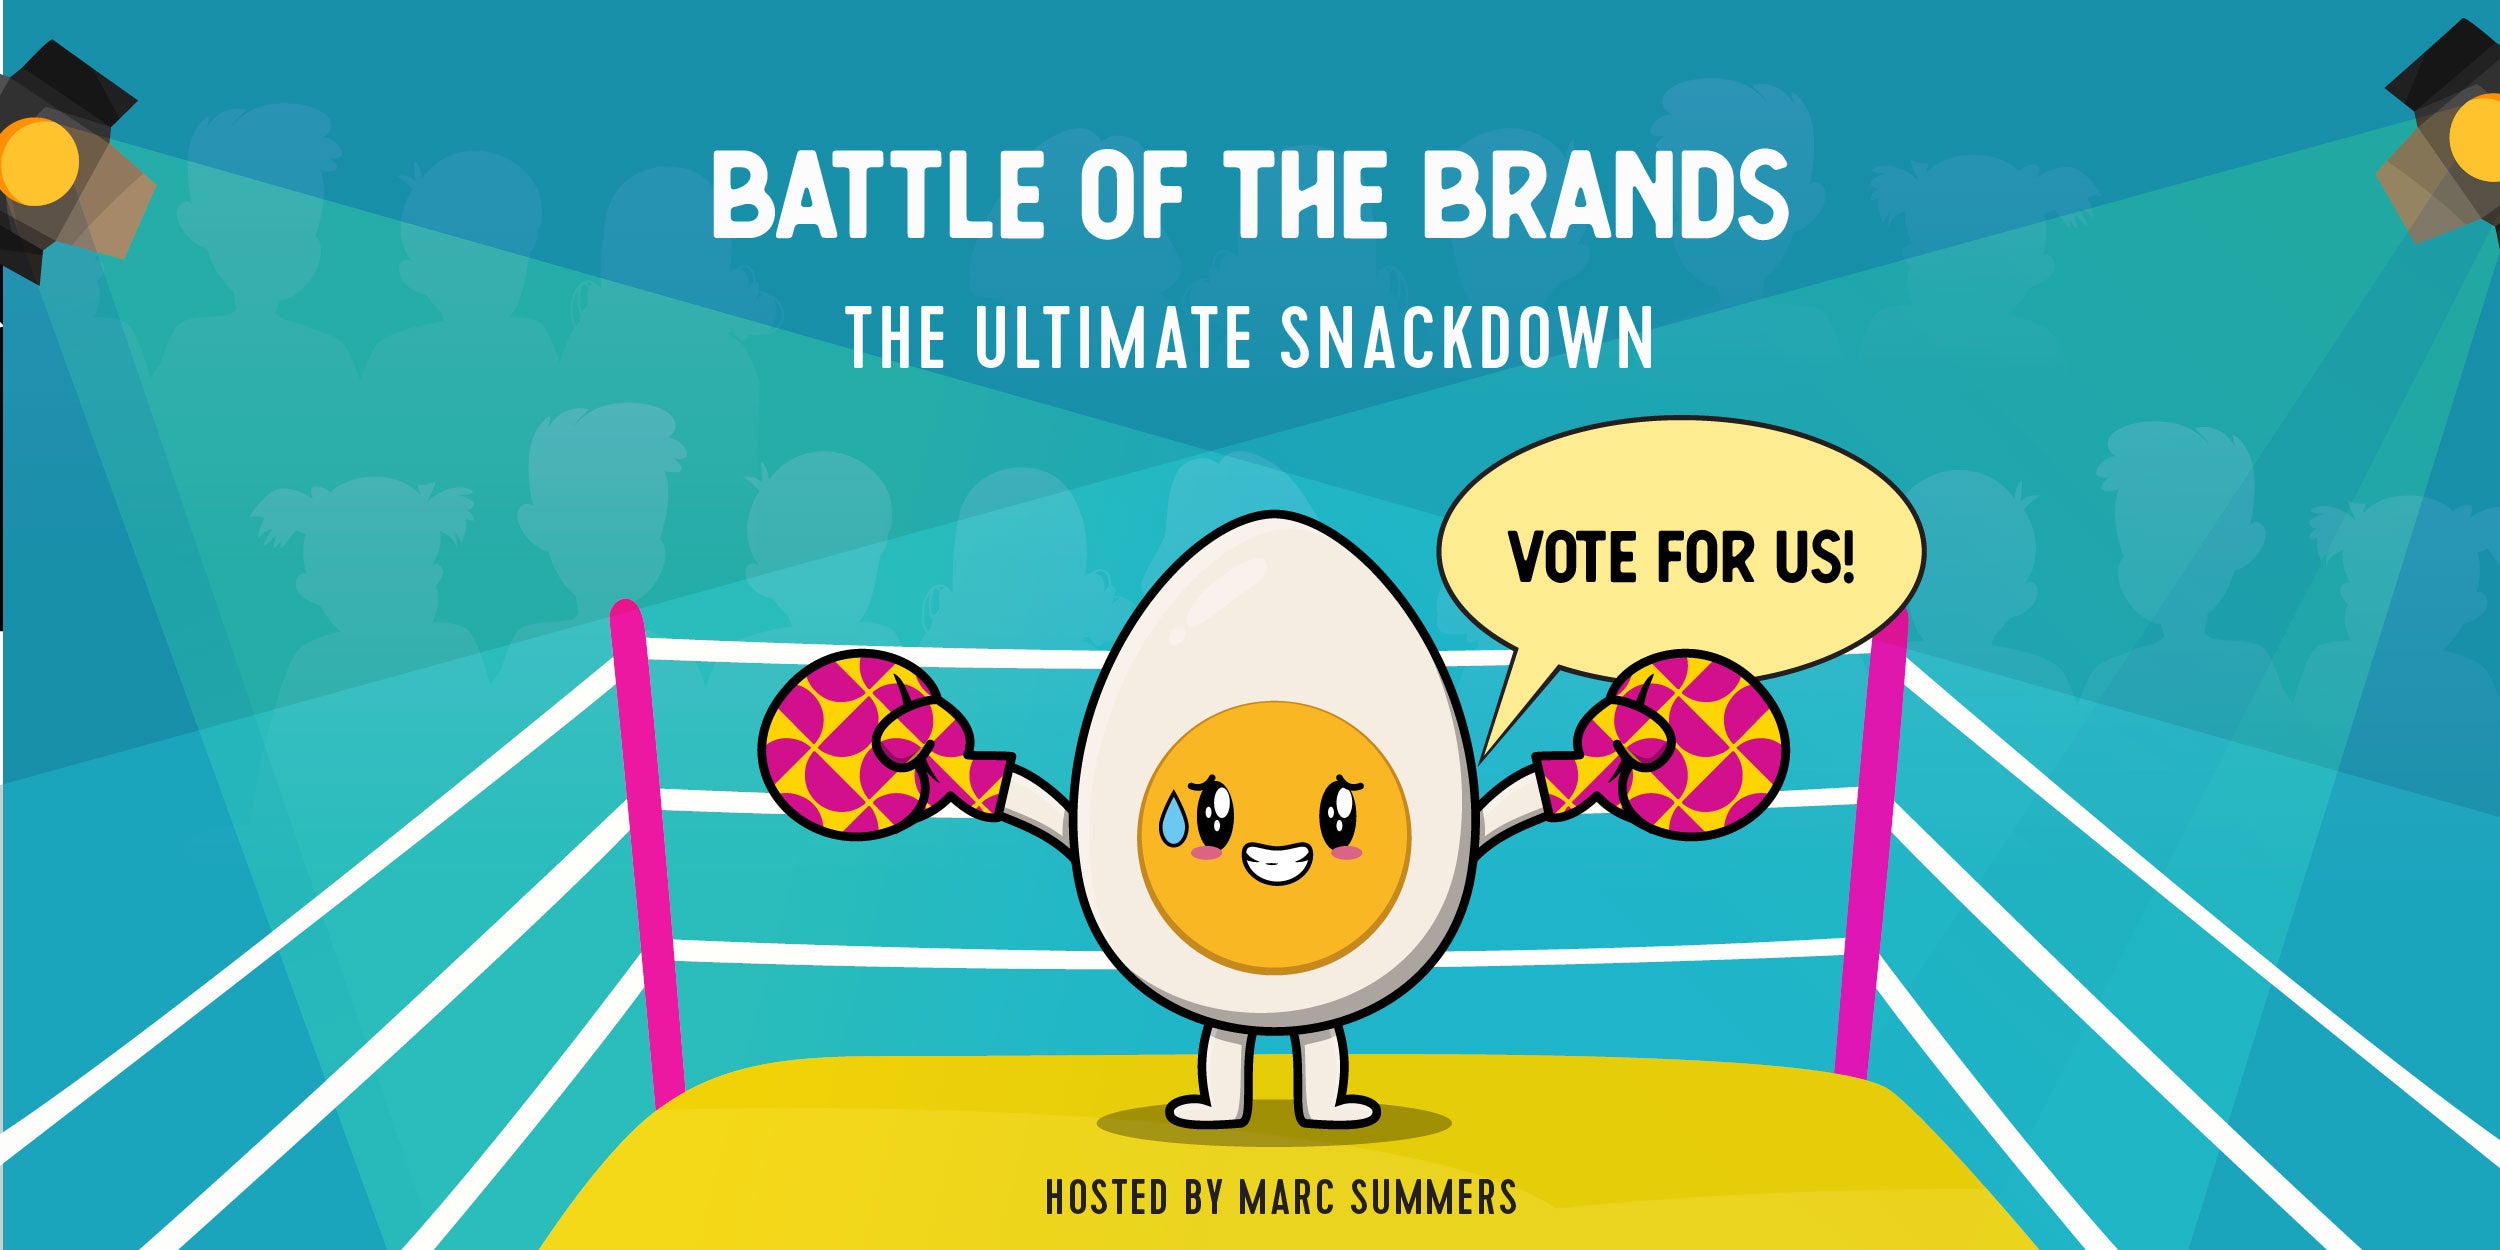 The Ultimate Snackdown: Battle of the Brands